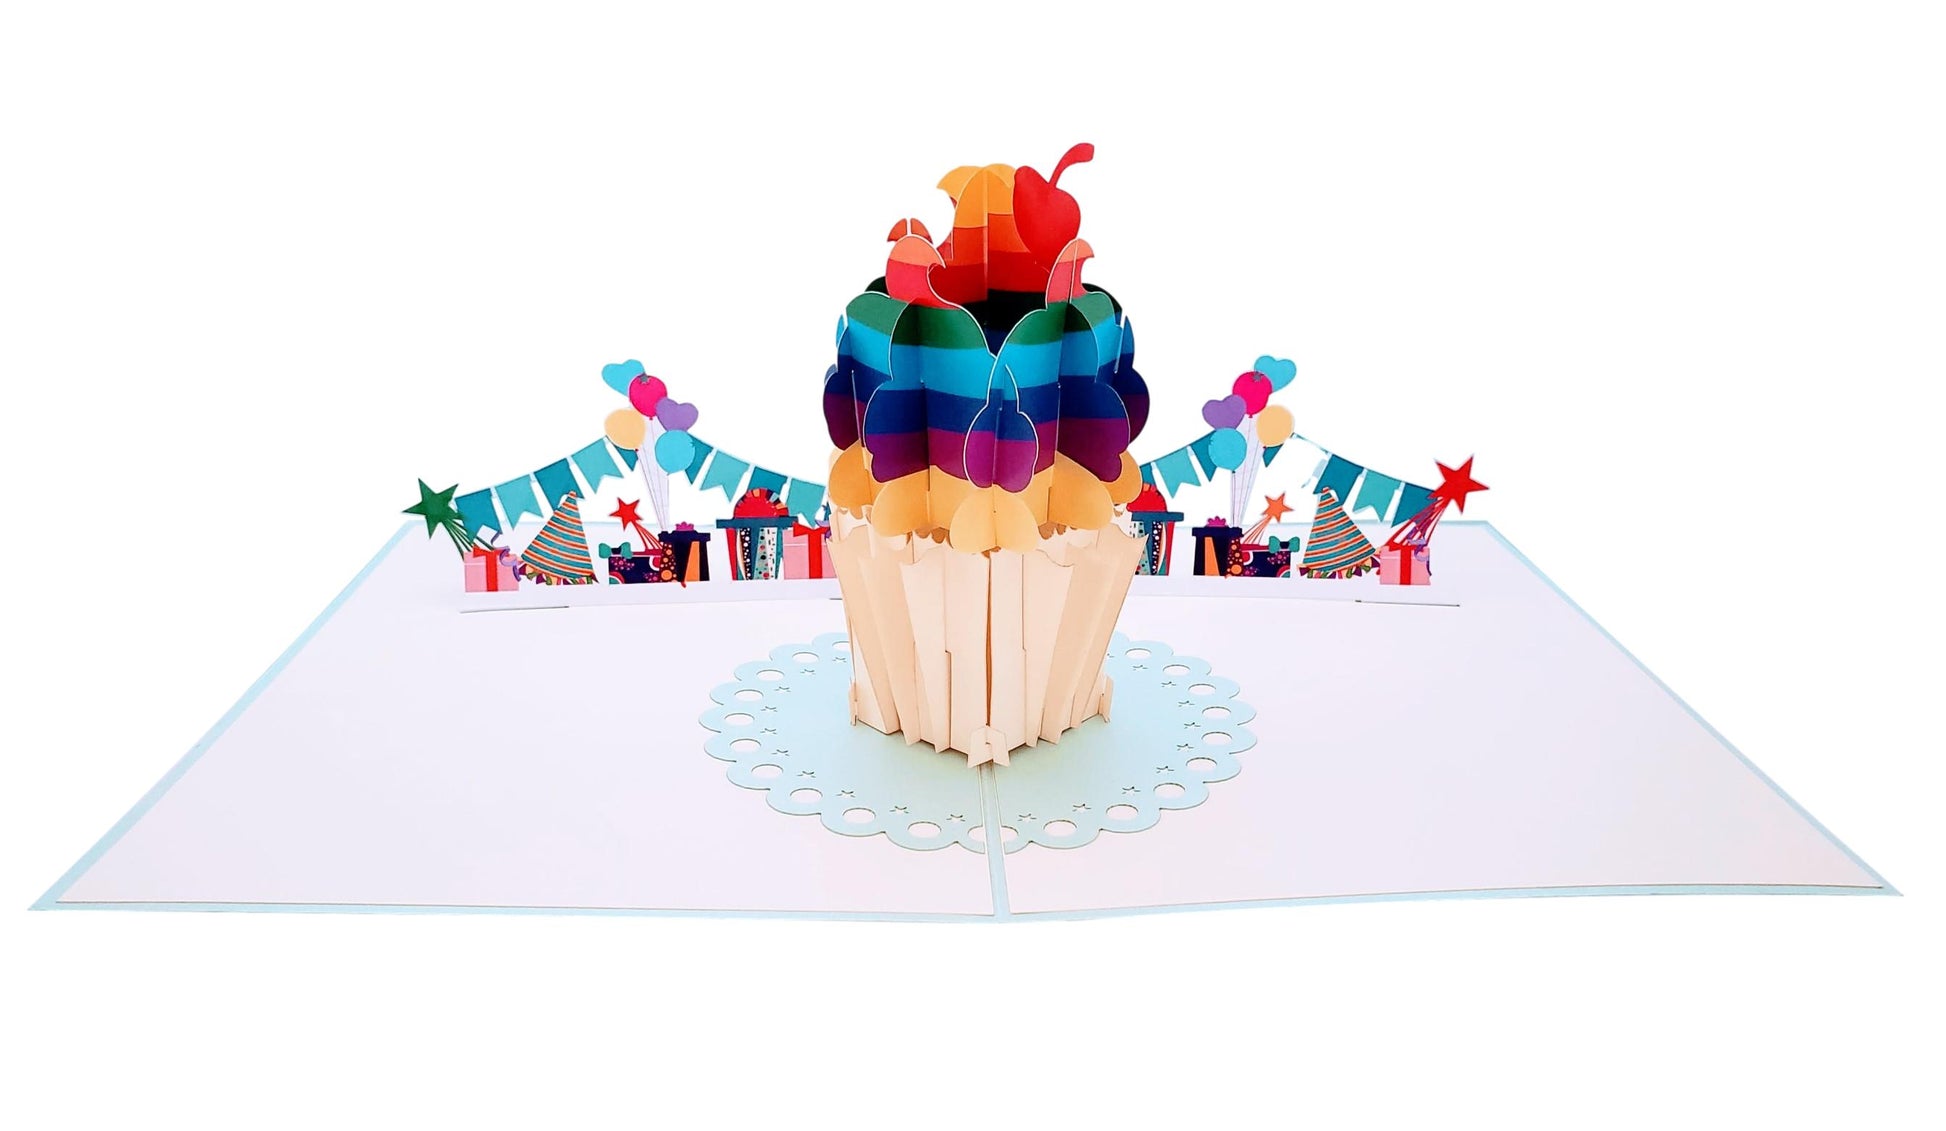 Happy Birthday Rainbow Cupcake 3D Pop Up Greeting Card - Birthday - Celebration - Fun - Special Days - iGifts And Cards